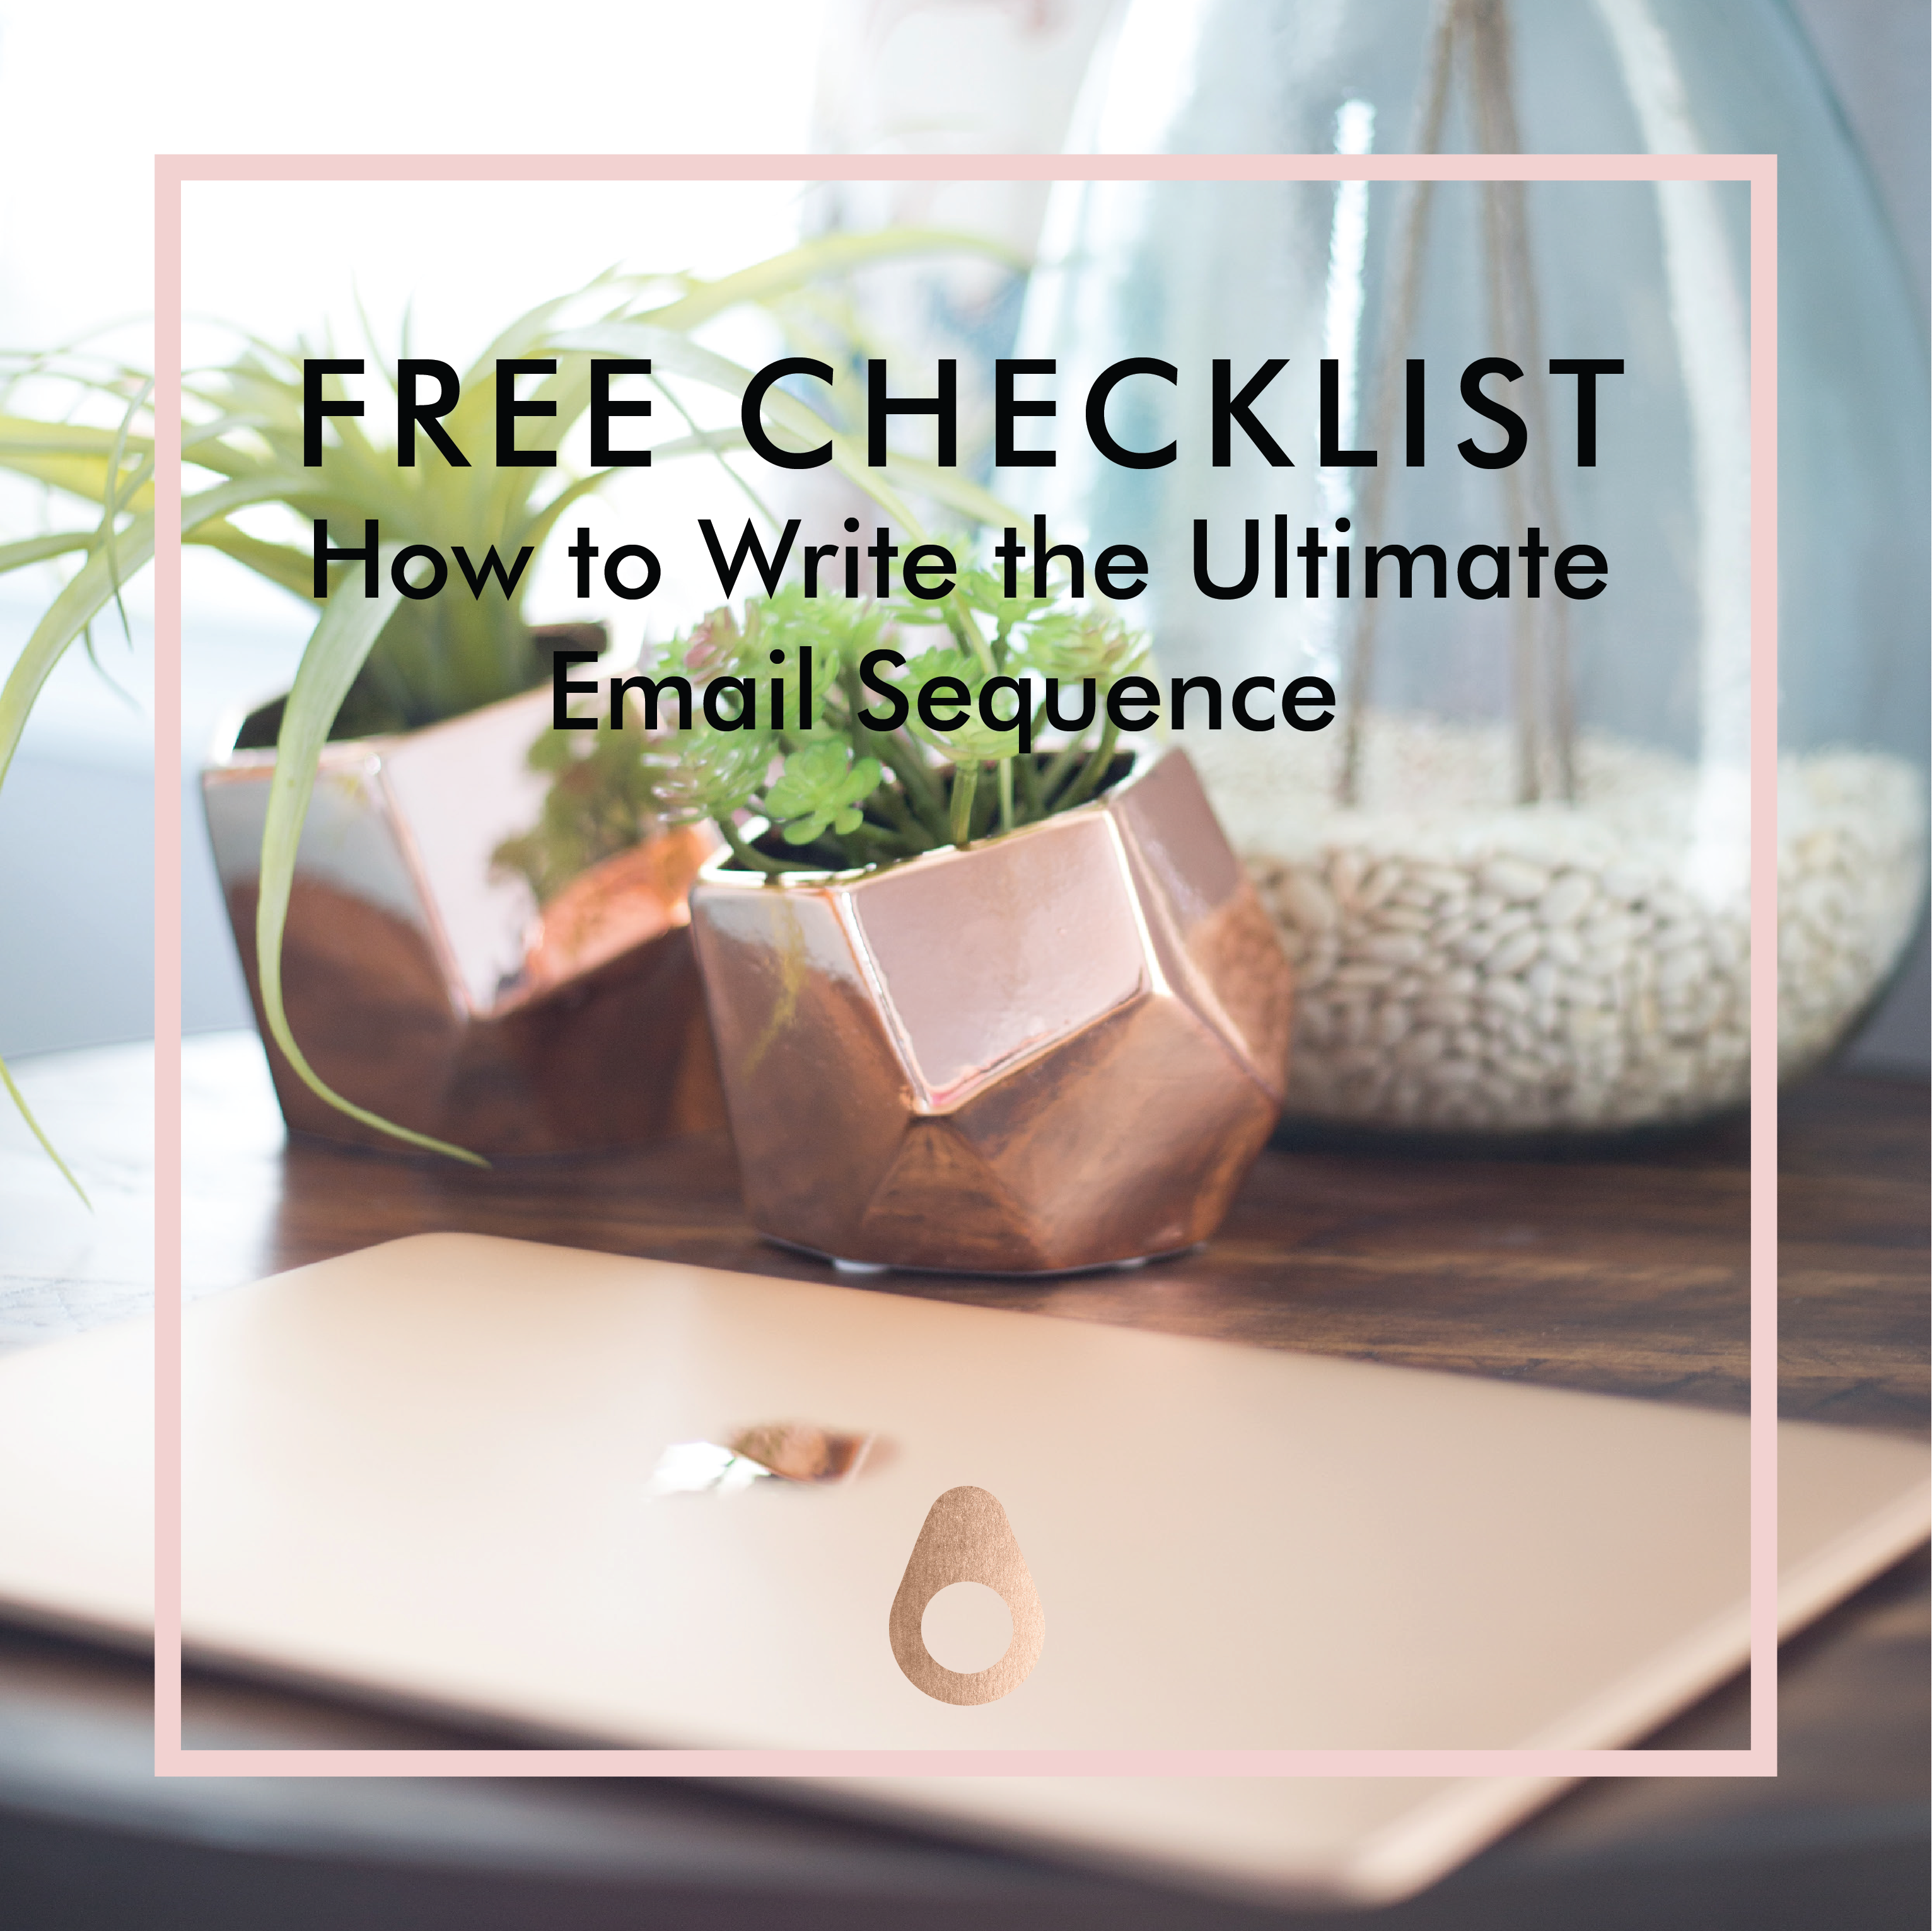 Free Checklist How to Write the Ultimate Email Sequence